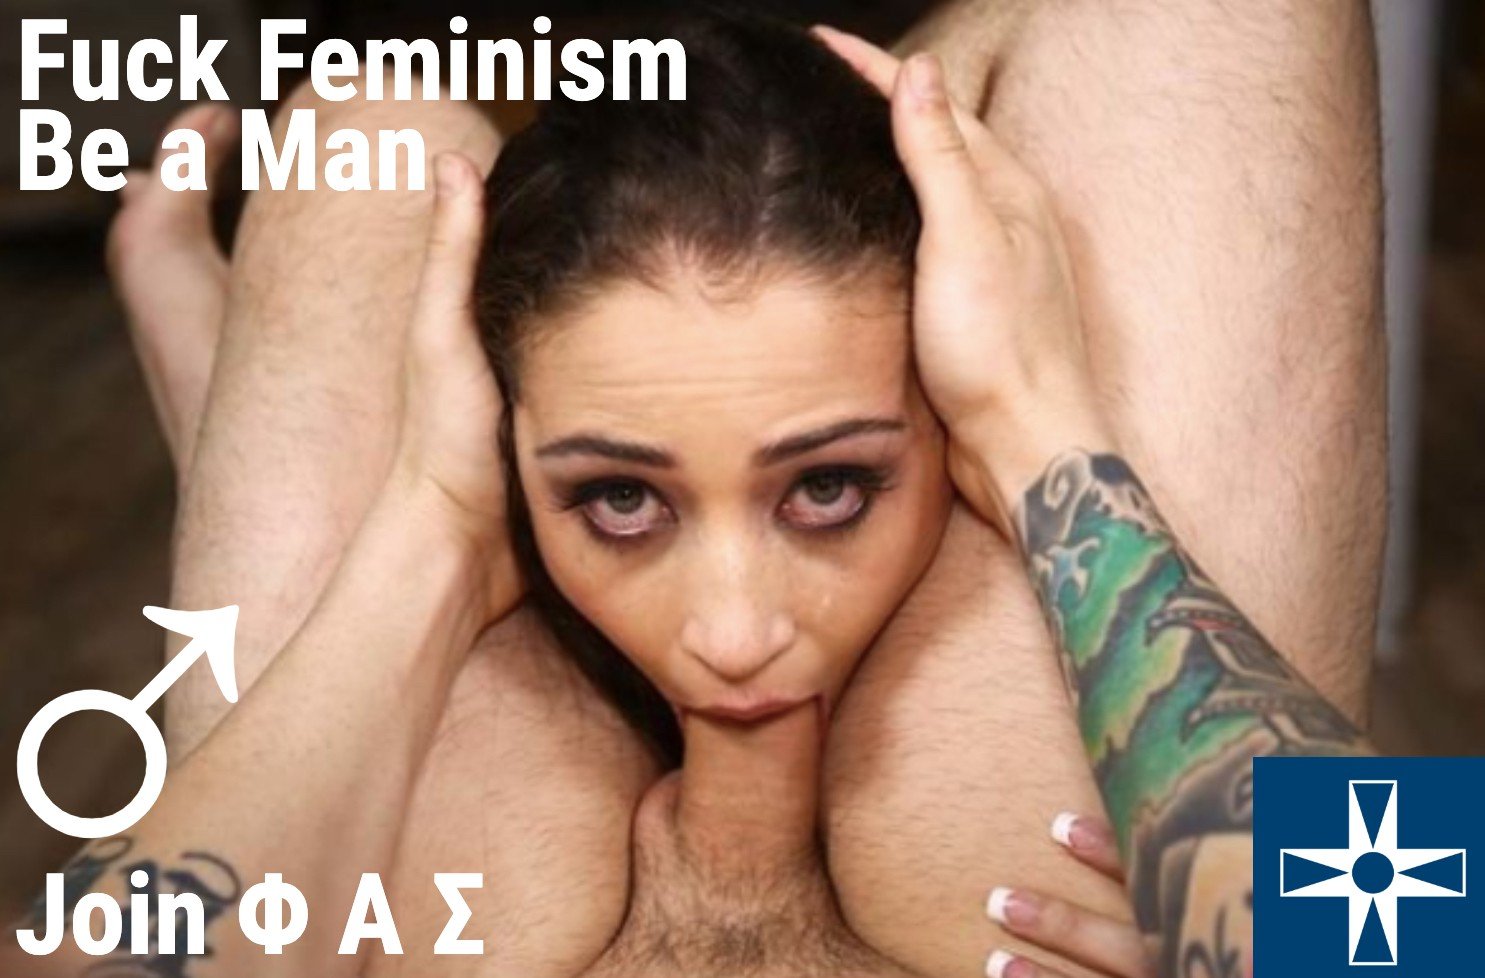 Watch the Photo by FaceFuckHer18 with the username @FaceFuckHer18, posted on June 11, 2019. The post is about the topic Male Supremacy. and the text says 'Join my community now (Non-fantasy)'